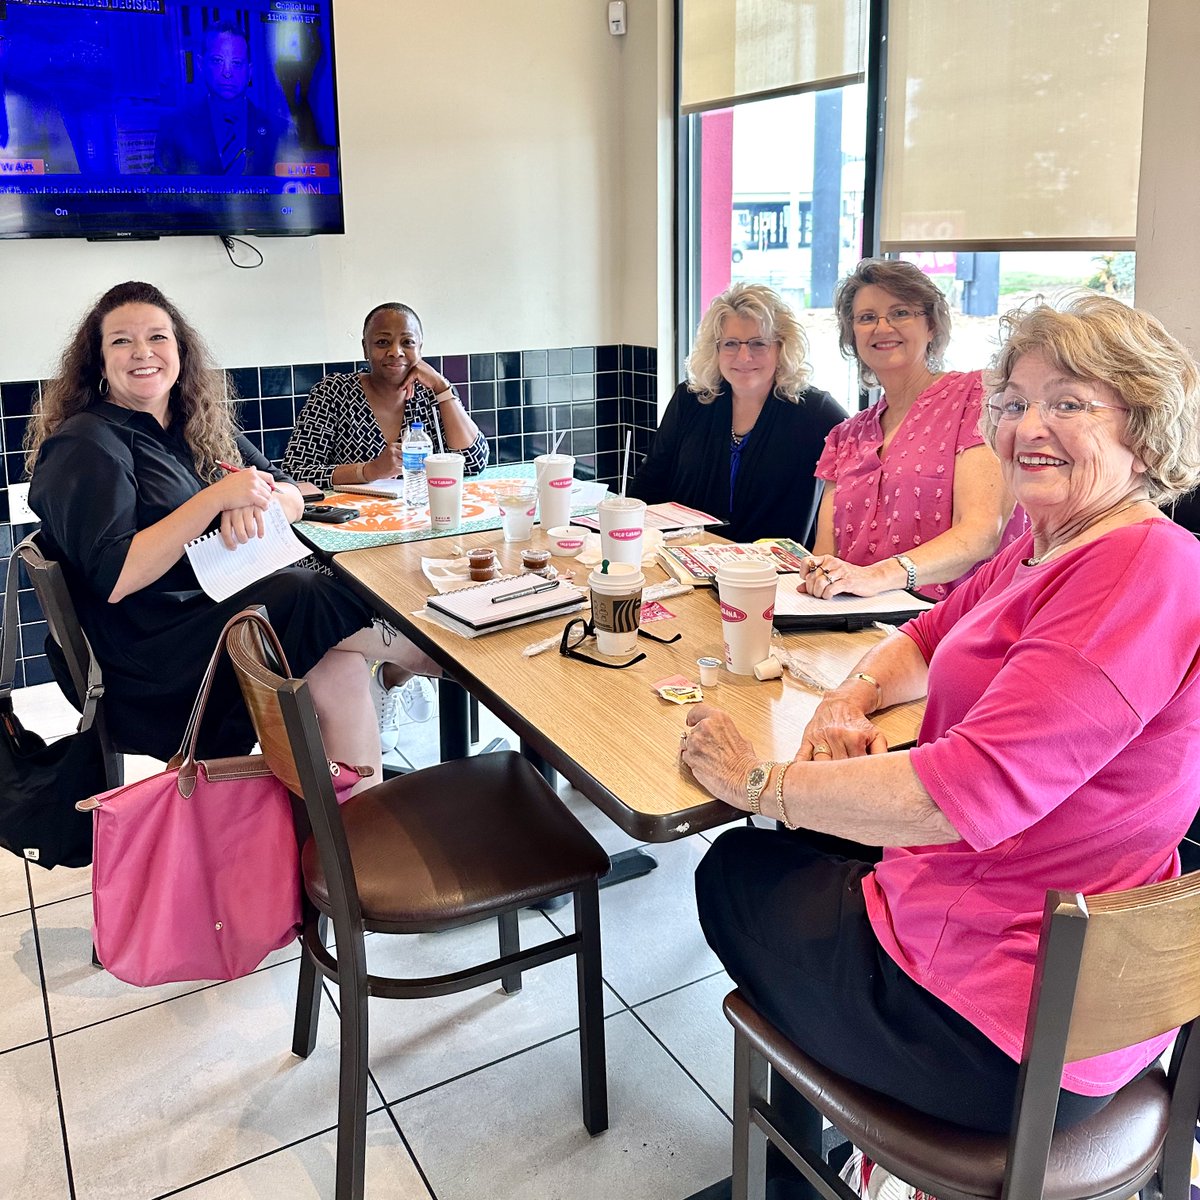 The Paint the Parkway Pink 5k Run/Walk committee is rocking its planning for the October 12th event. ️📝 Time flies, so grab your besties, dust off your pinkest outfits, and register now for an unforgettable morning! 
painttheparkwaypink.com
#PlanningPink #PaintTheParkwayPink